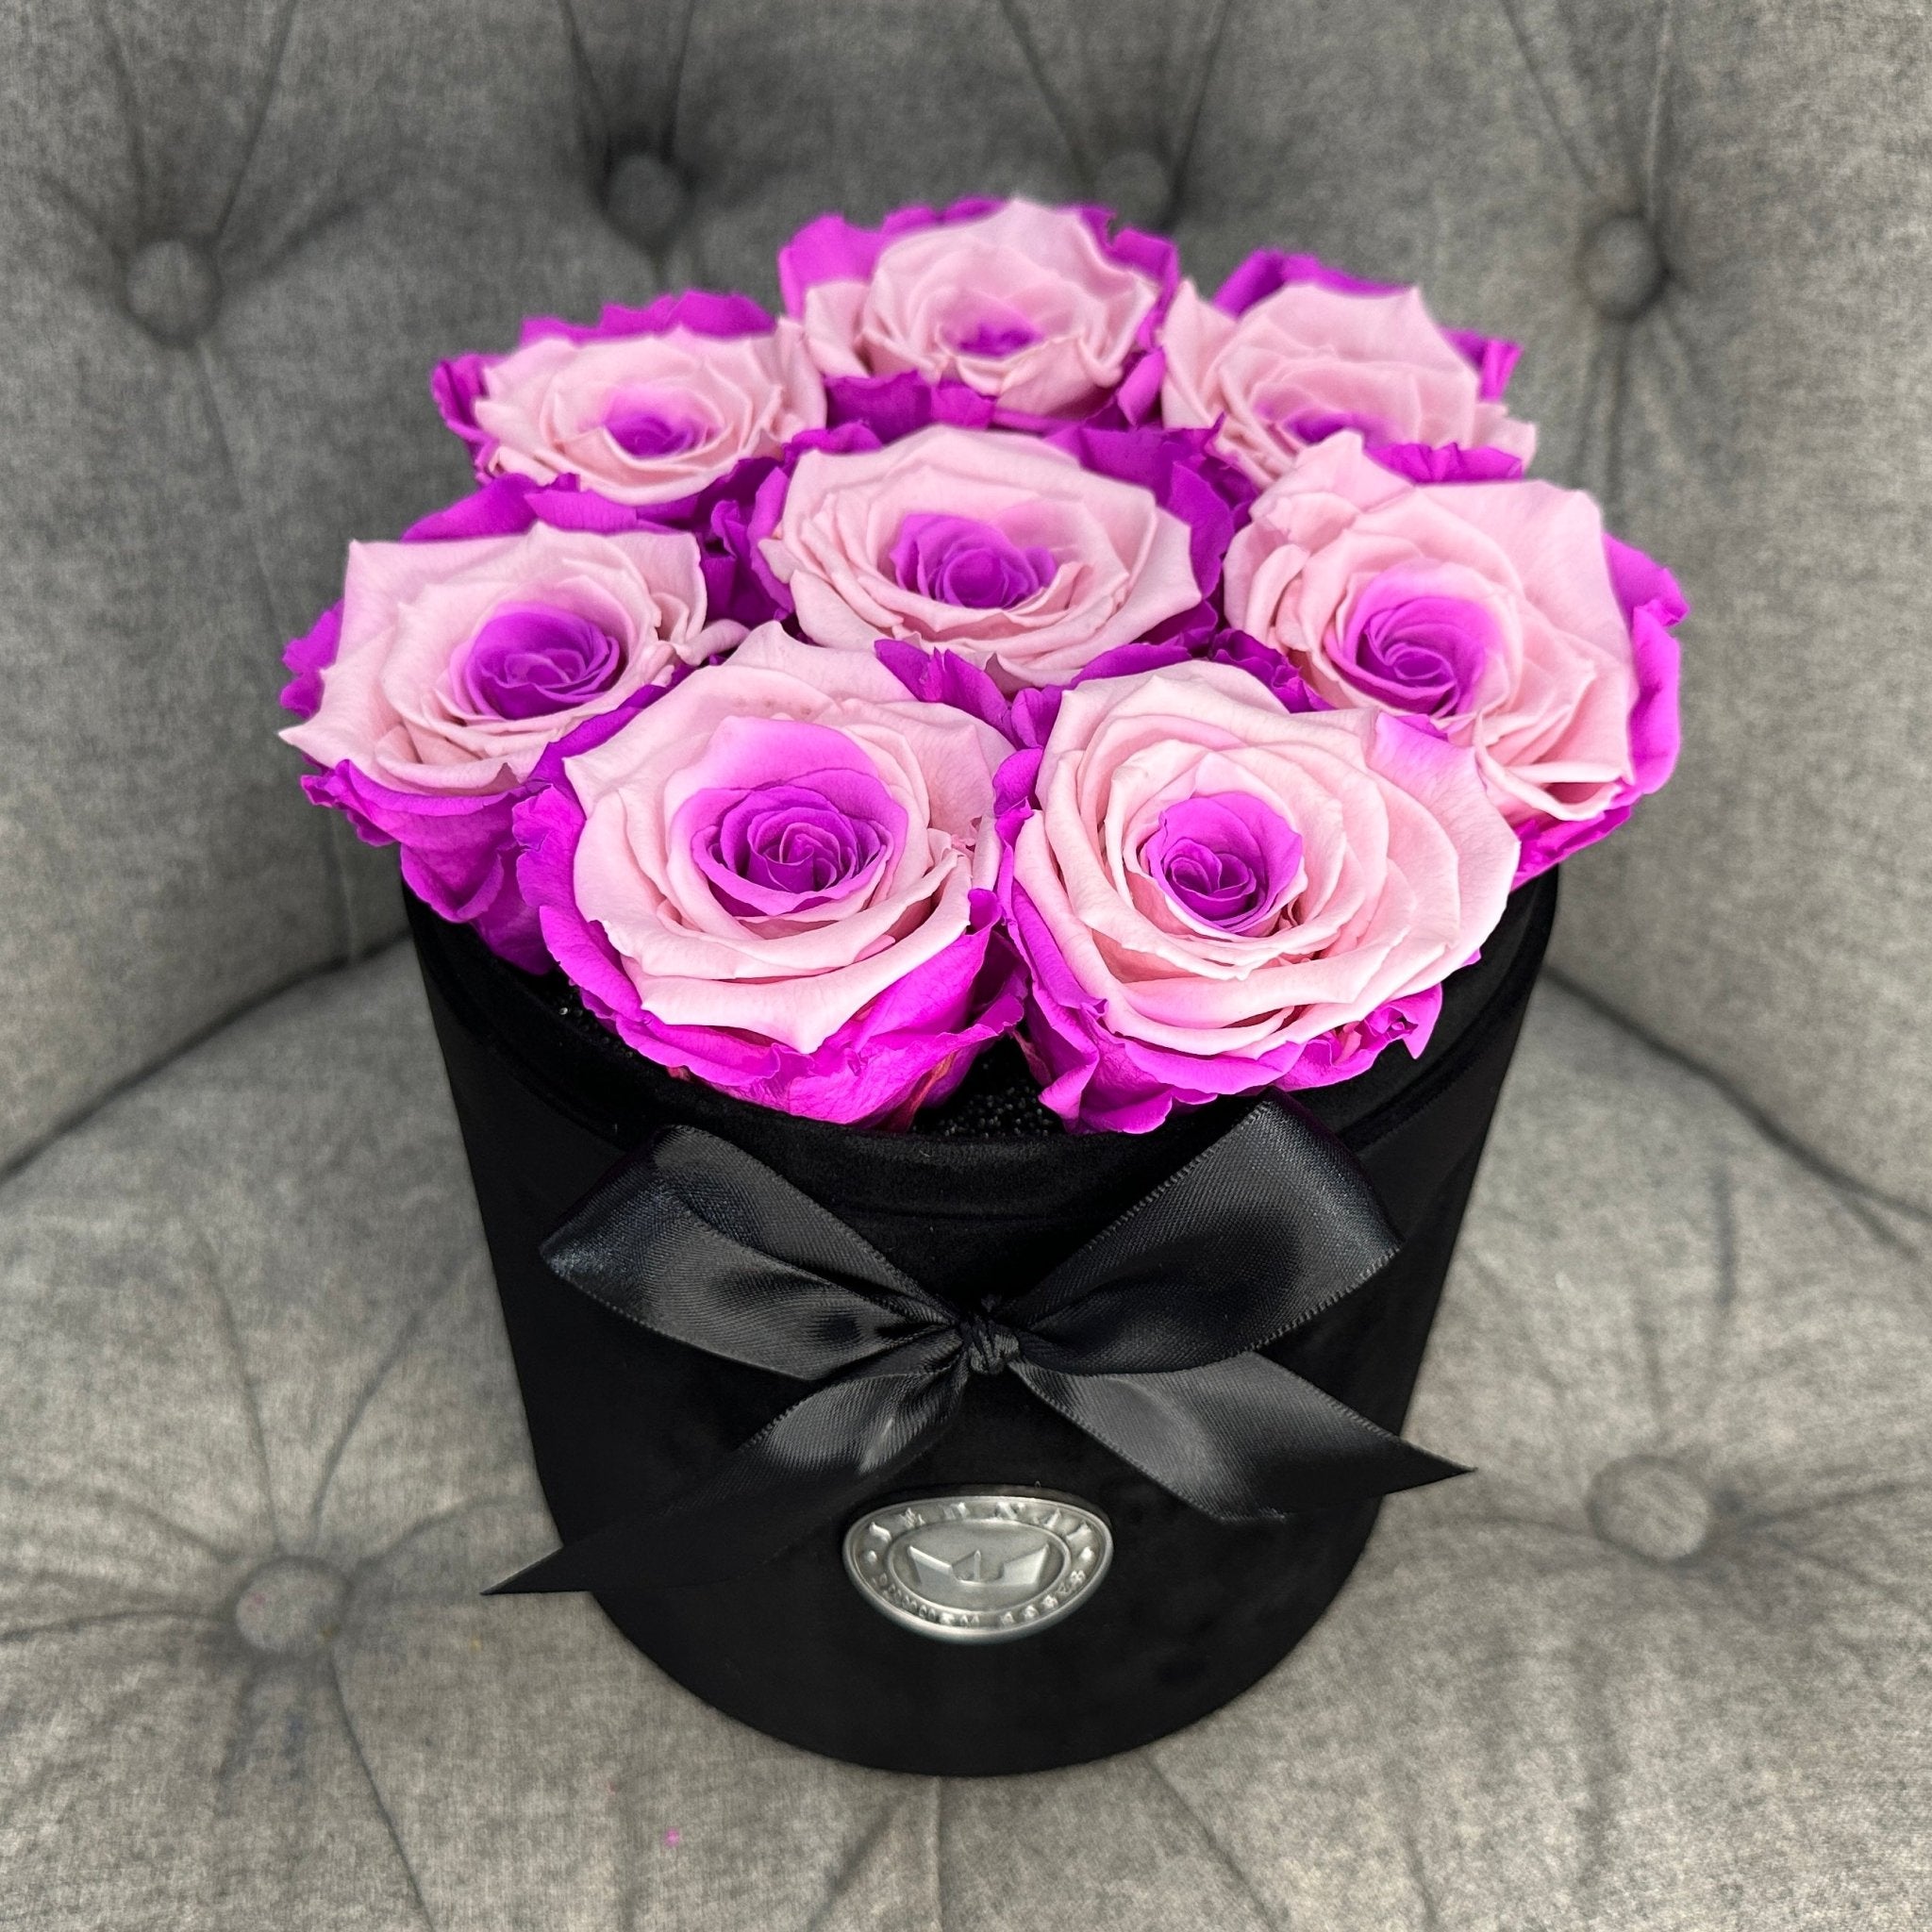 Medium Black Suede Forever Rose Box - Candy Floss Eternal Roses - Jednay Roses